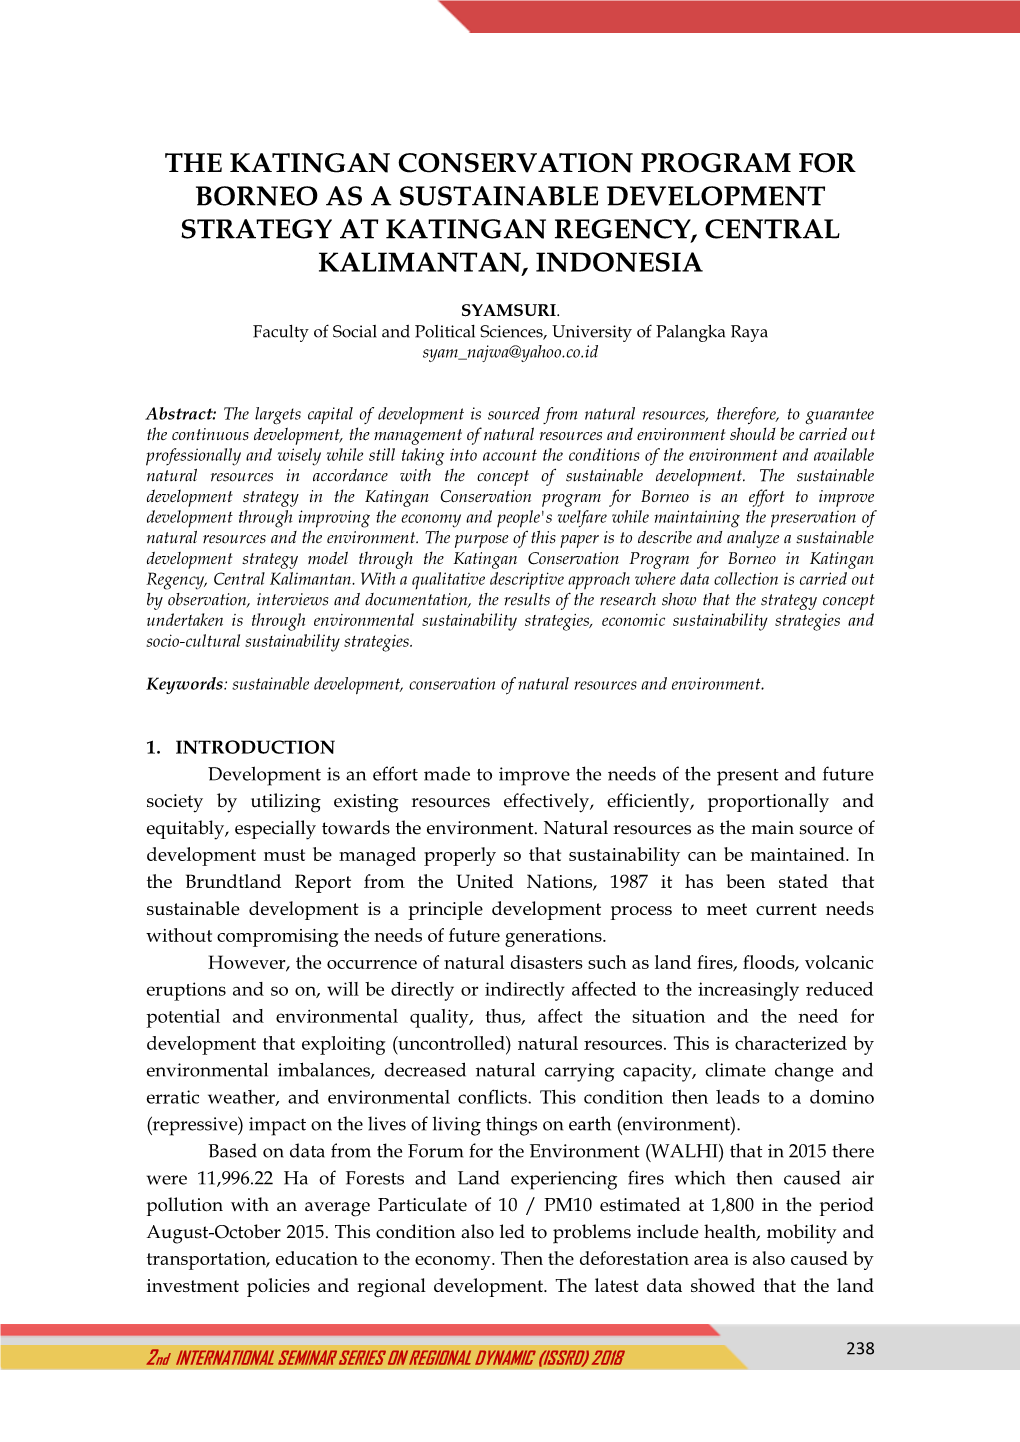 The Katingan Conservation Program for Borneo As a Sustainable Development Strategy at Katingan Regency, Central Kalimantan, Indonesia